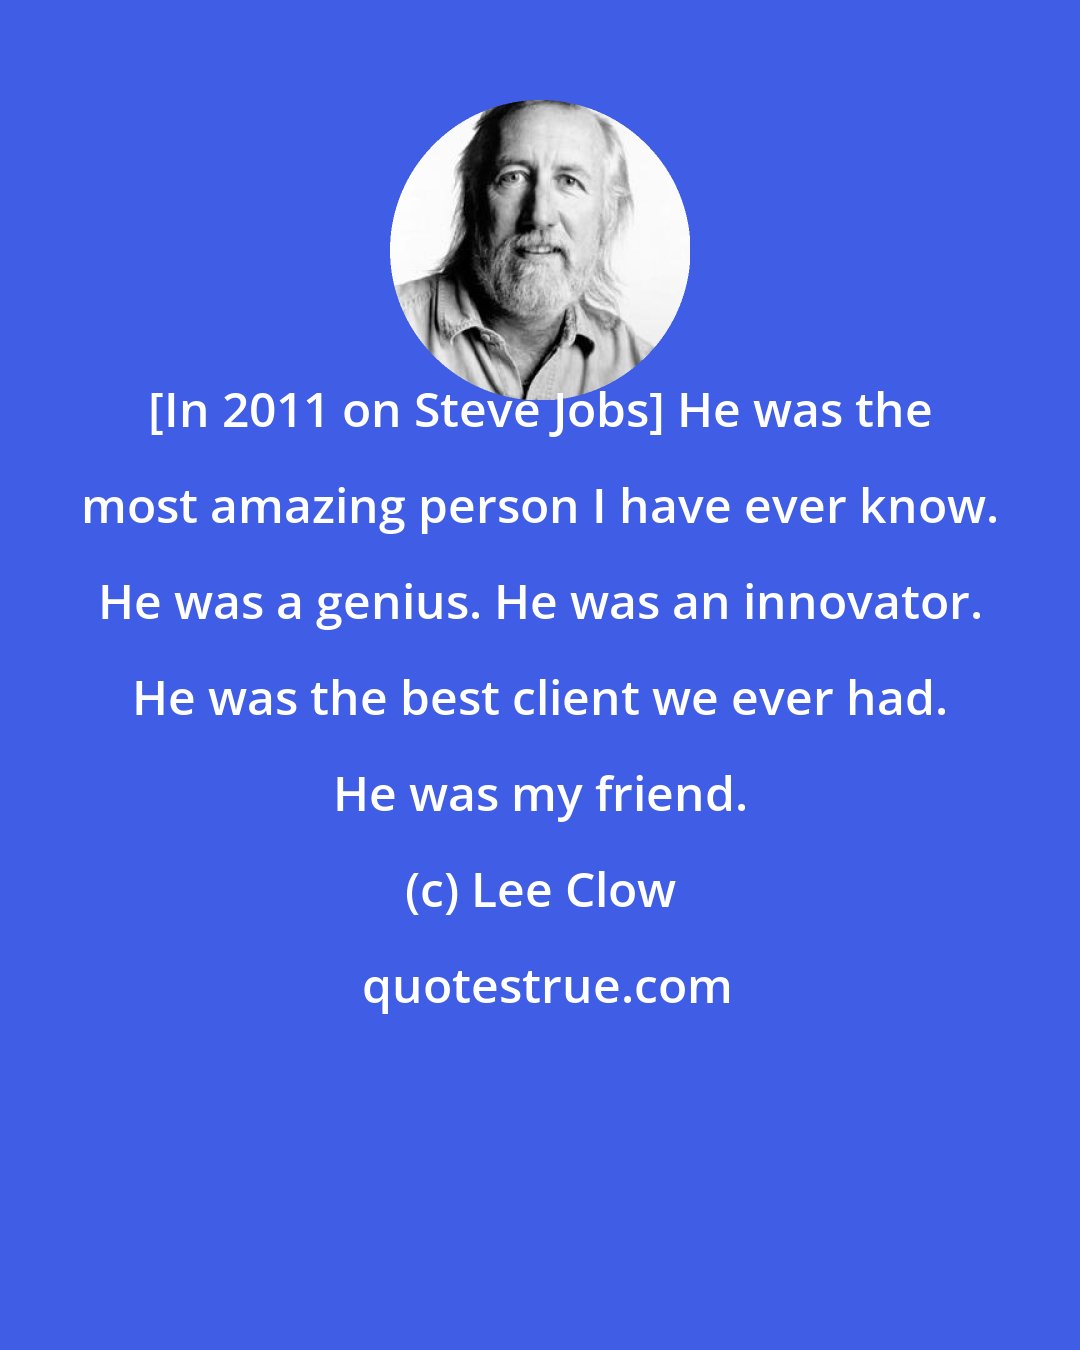 Lee Clow: [In 2011 on Steve Jobs] He was the most amazing person I have ever know. He was a genius. He was an innovator. He was the best client we ever had. He was my friend.